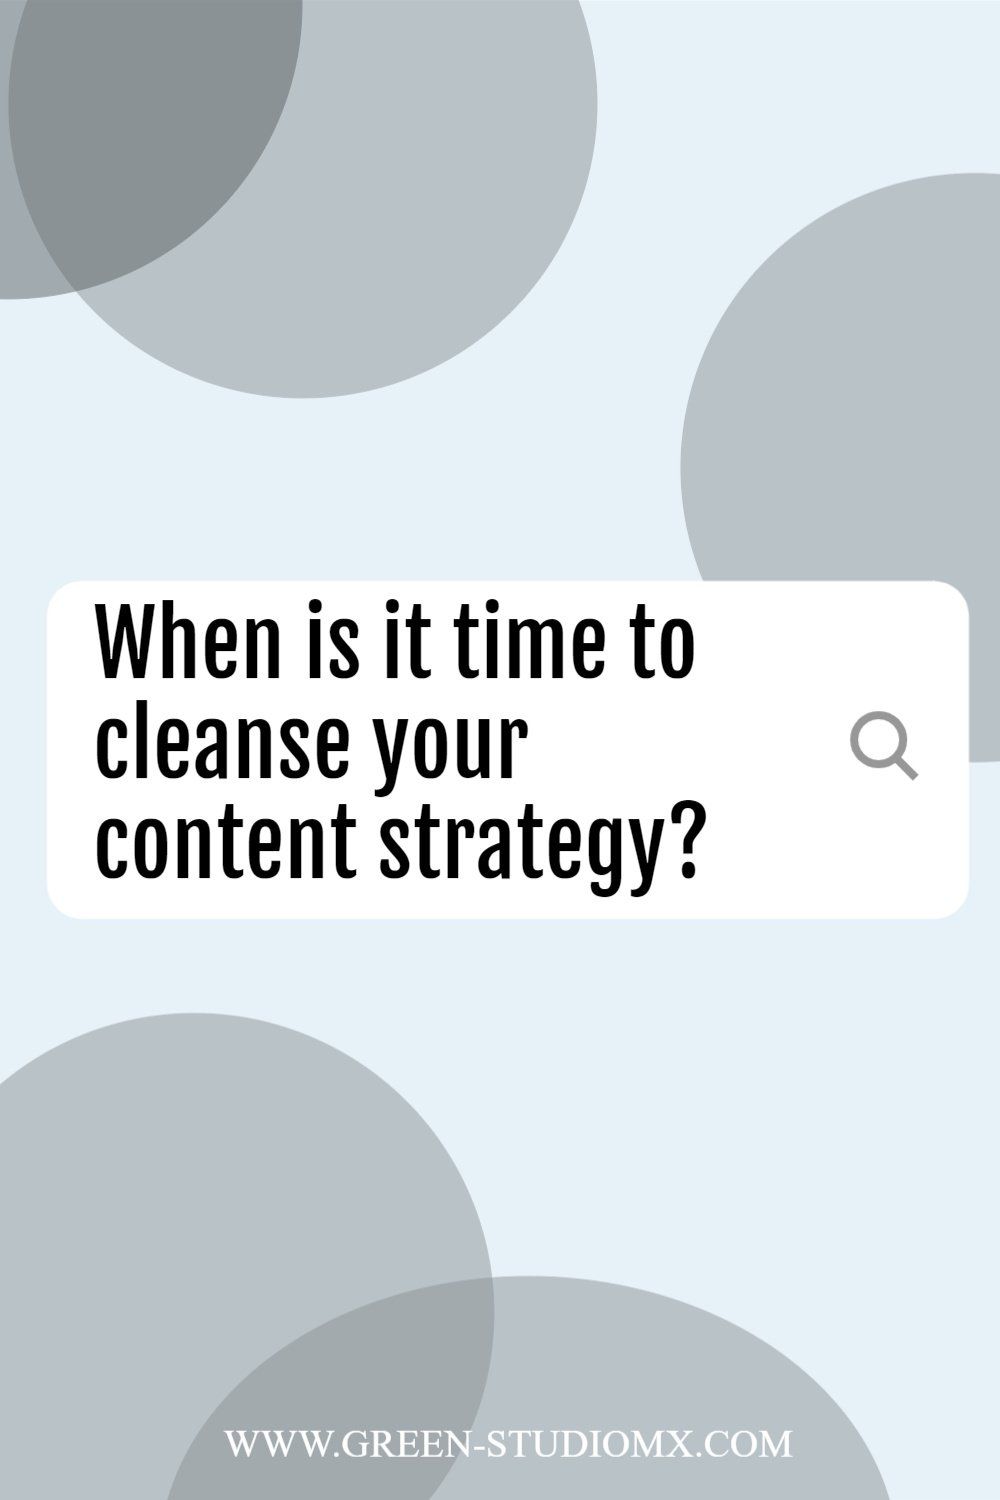 When is it time to cleanse your content strategy?